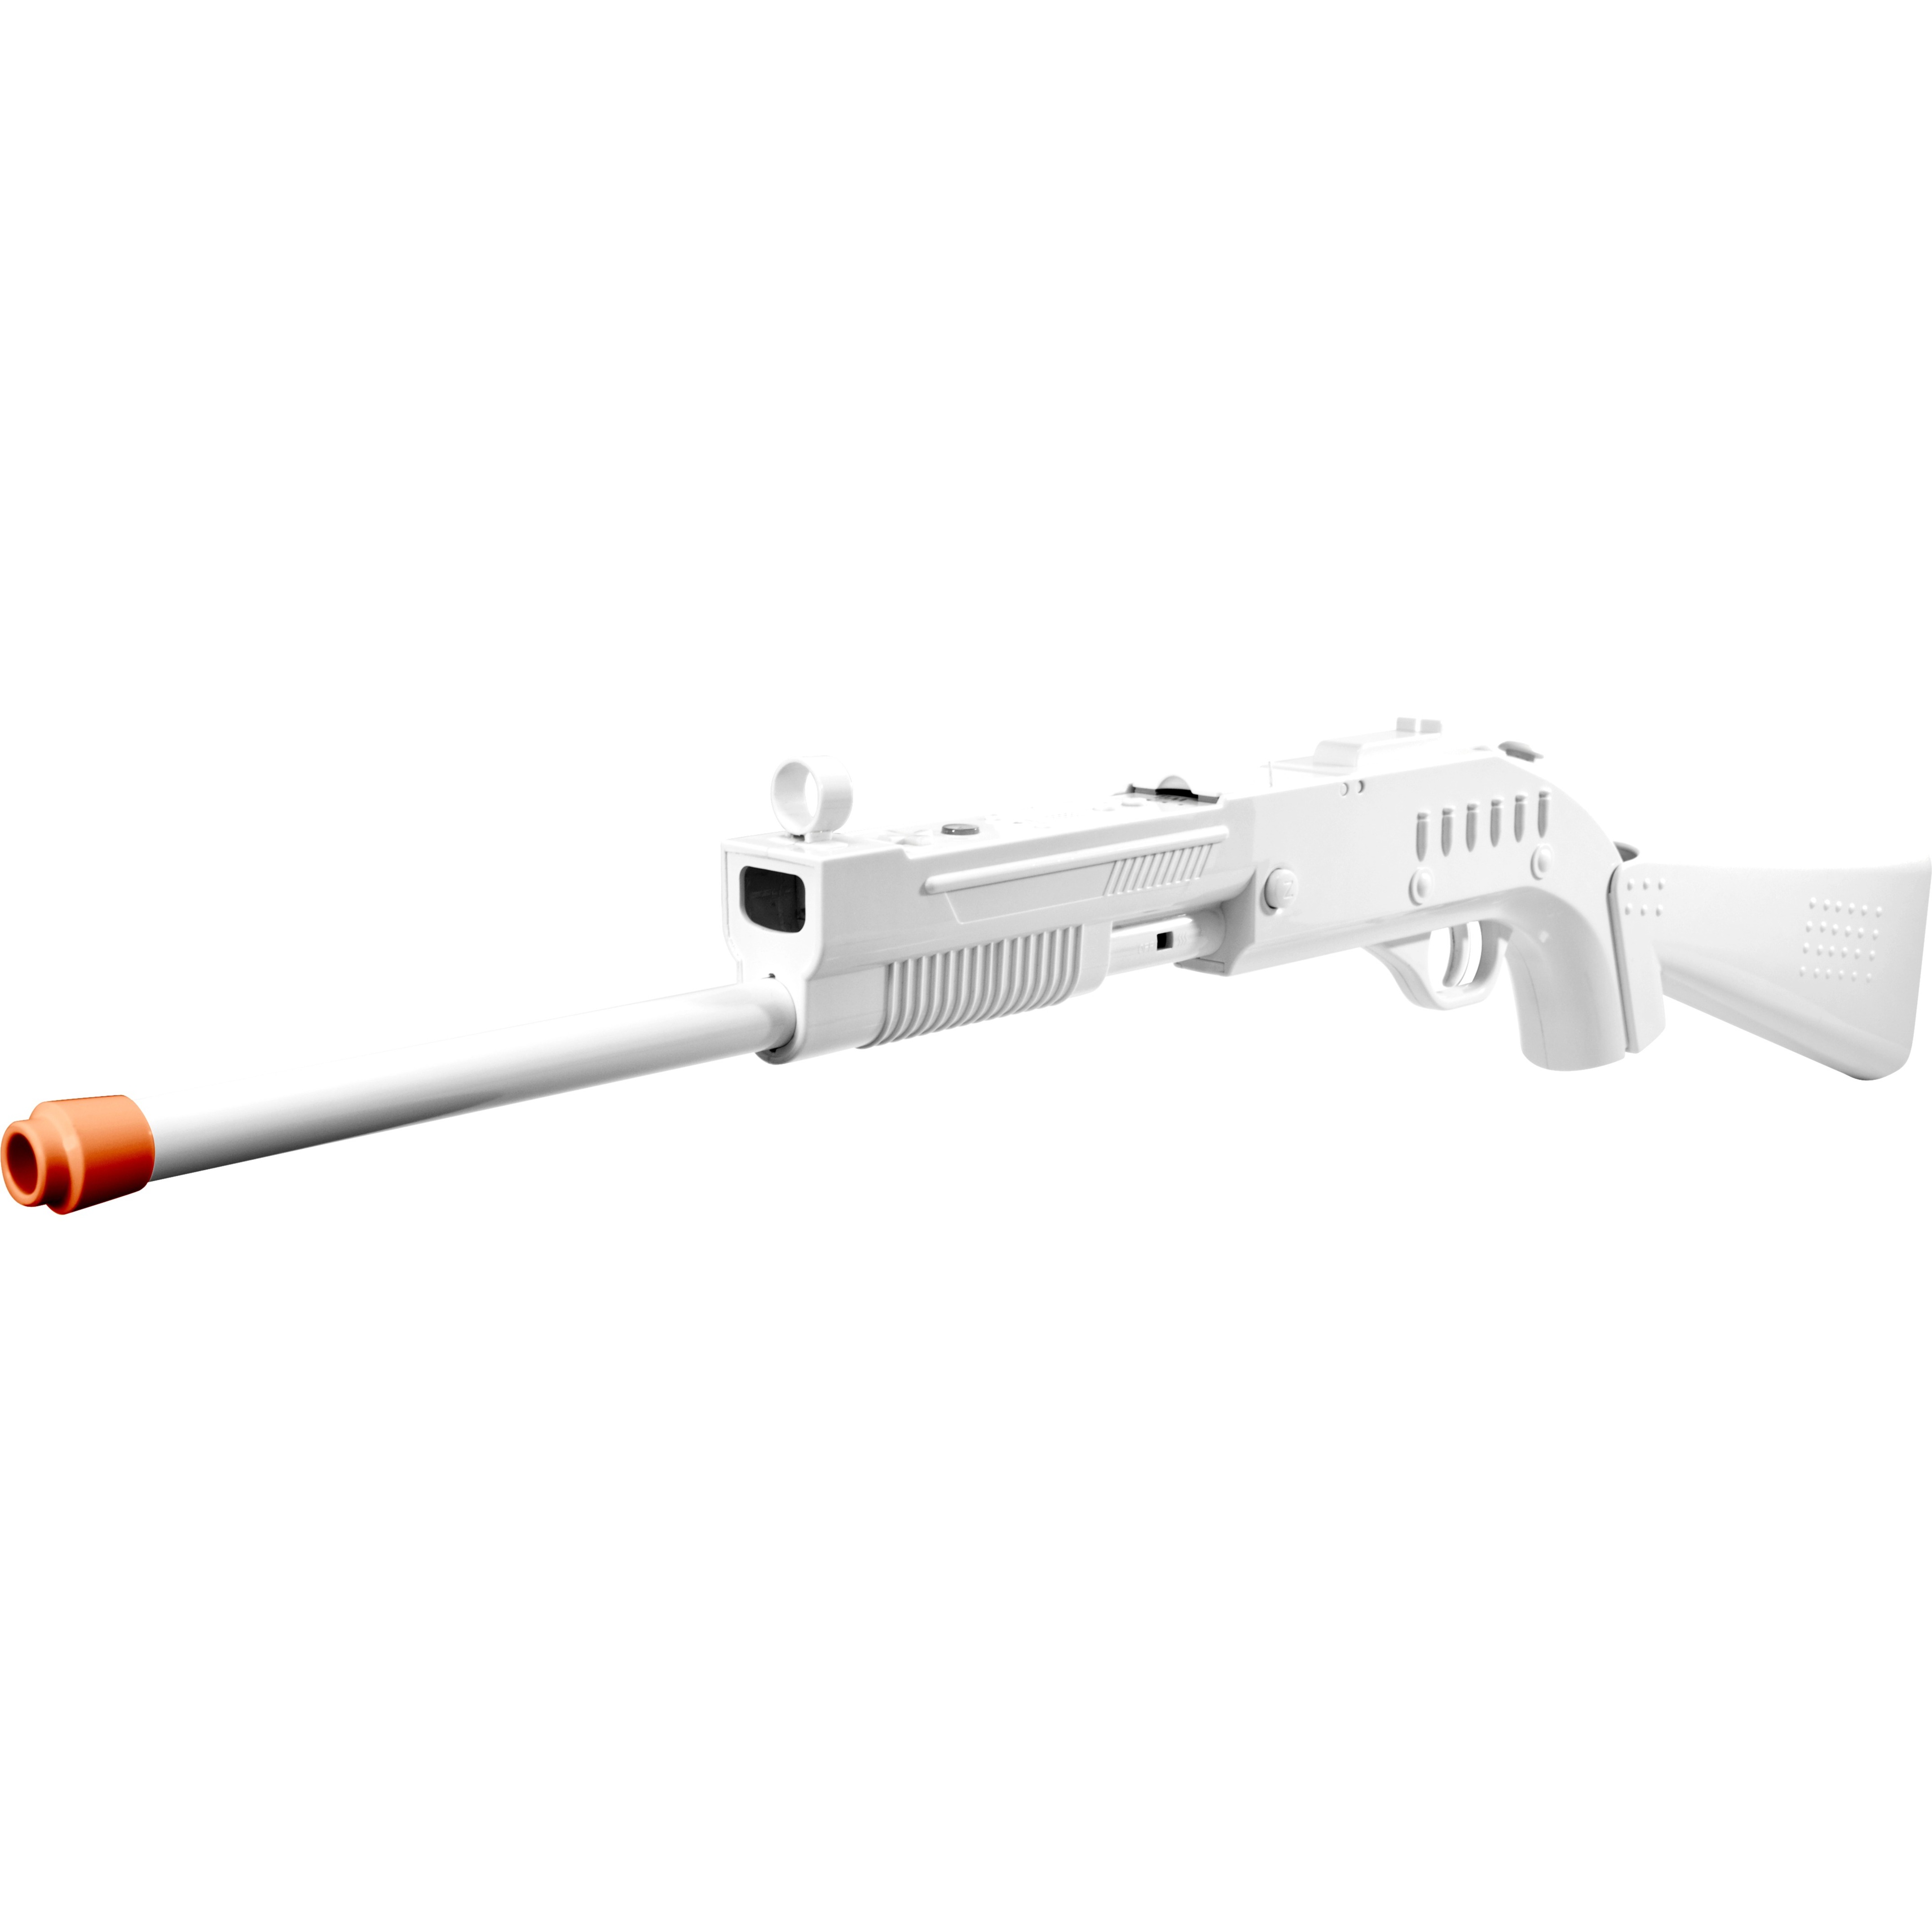 CTA Digital Sure Shot Rifle for Wii - image 2 of 3